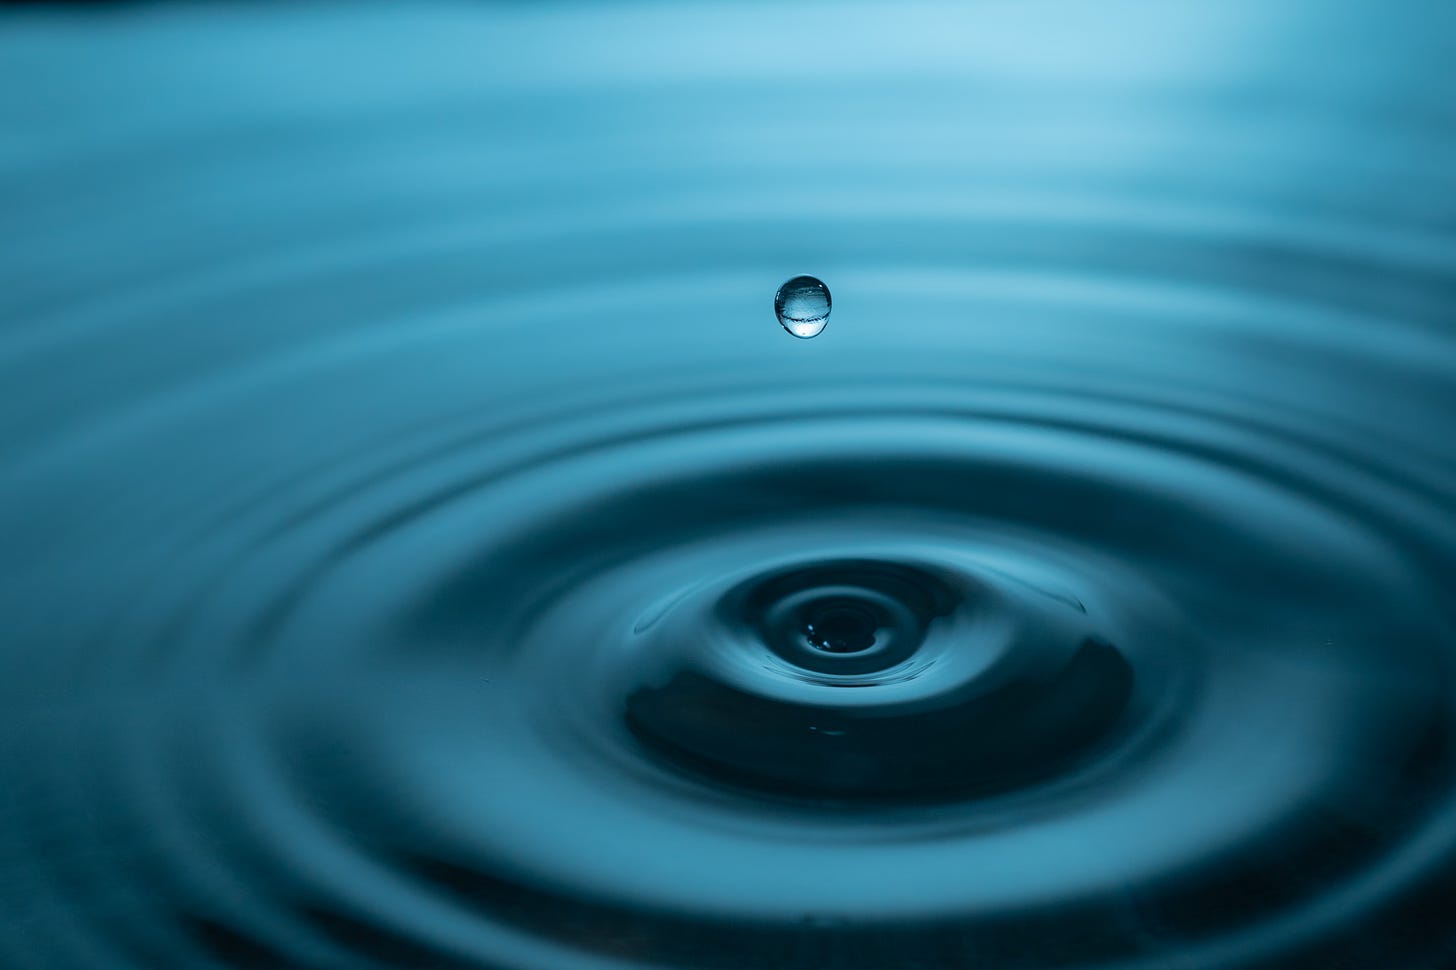 a single drop hangs suspended over the circular wakes of the previous drop as it falls into a blue pool of water